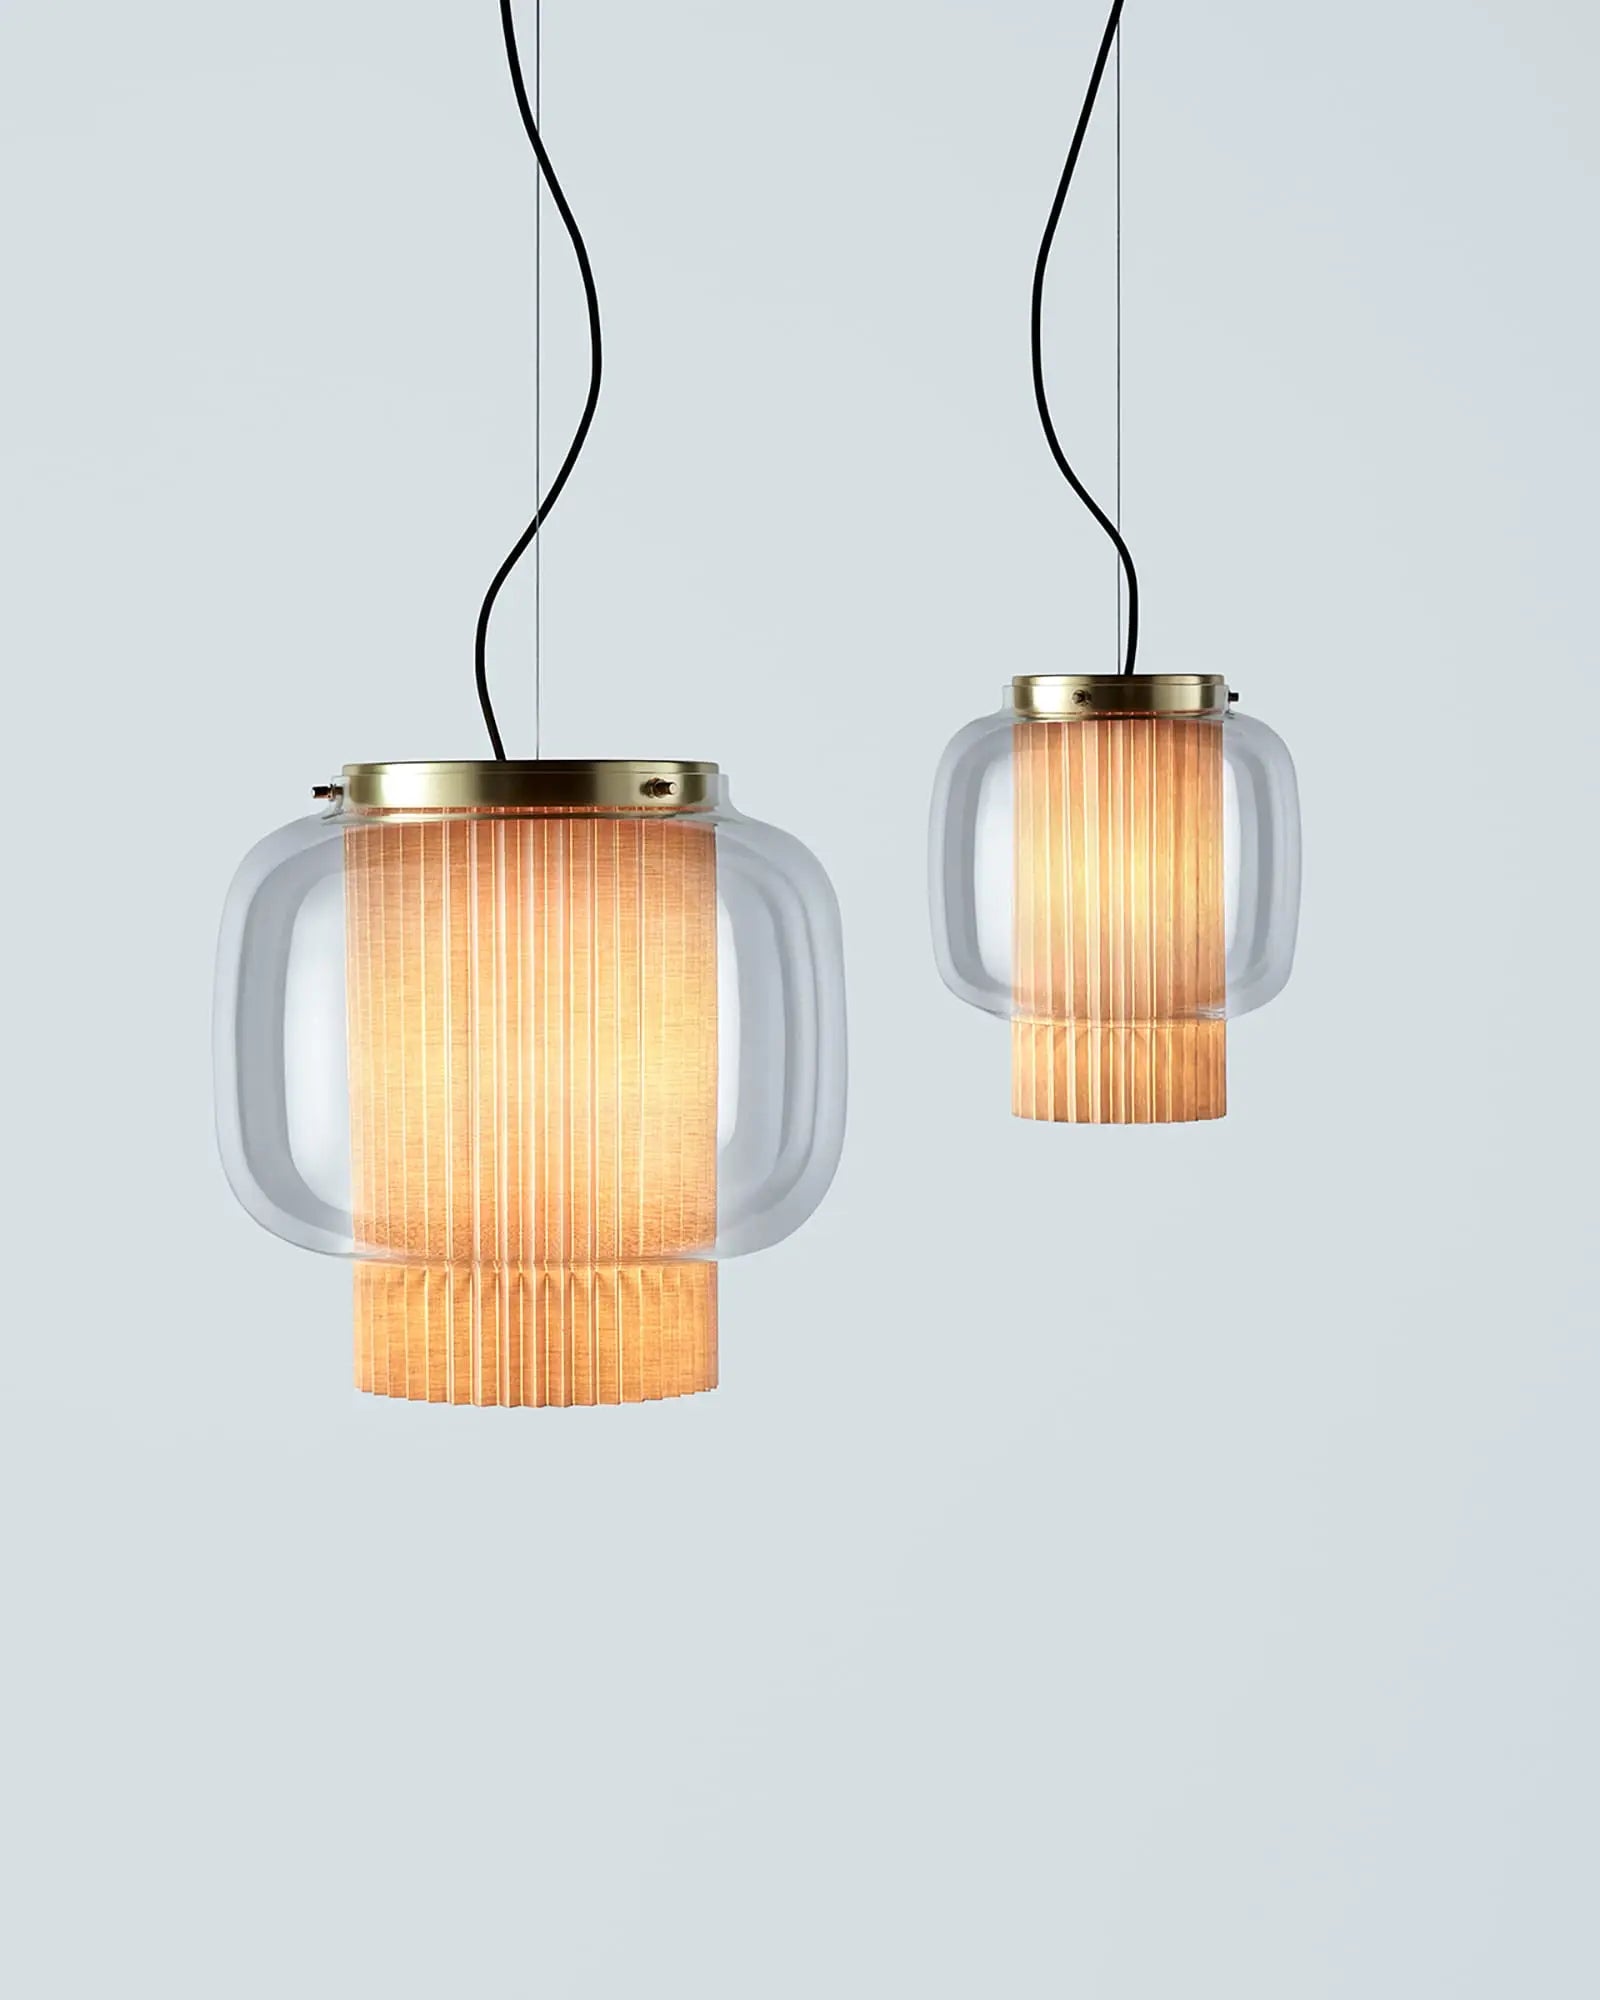 Manila Glass and textile contemporary pendant light in brass and beige